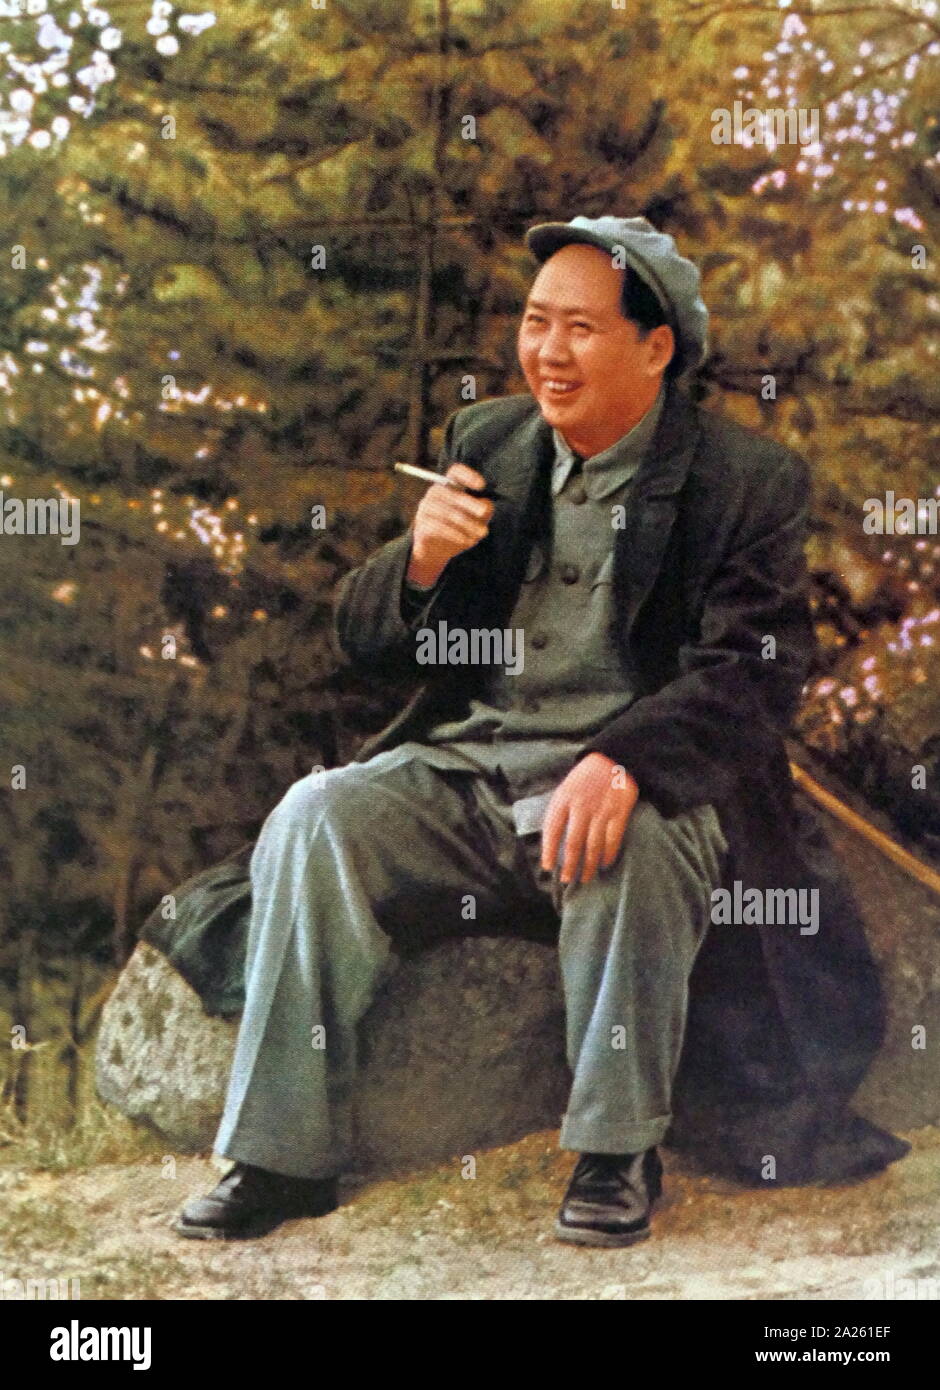 Chairman Mao in Beidaihe. (1954). Mao Zedong (1893 - September 9, 1976),  was a Chinese communist revolutionary who became the founding father of the  People's Republic of China (PRC), which he ruled